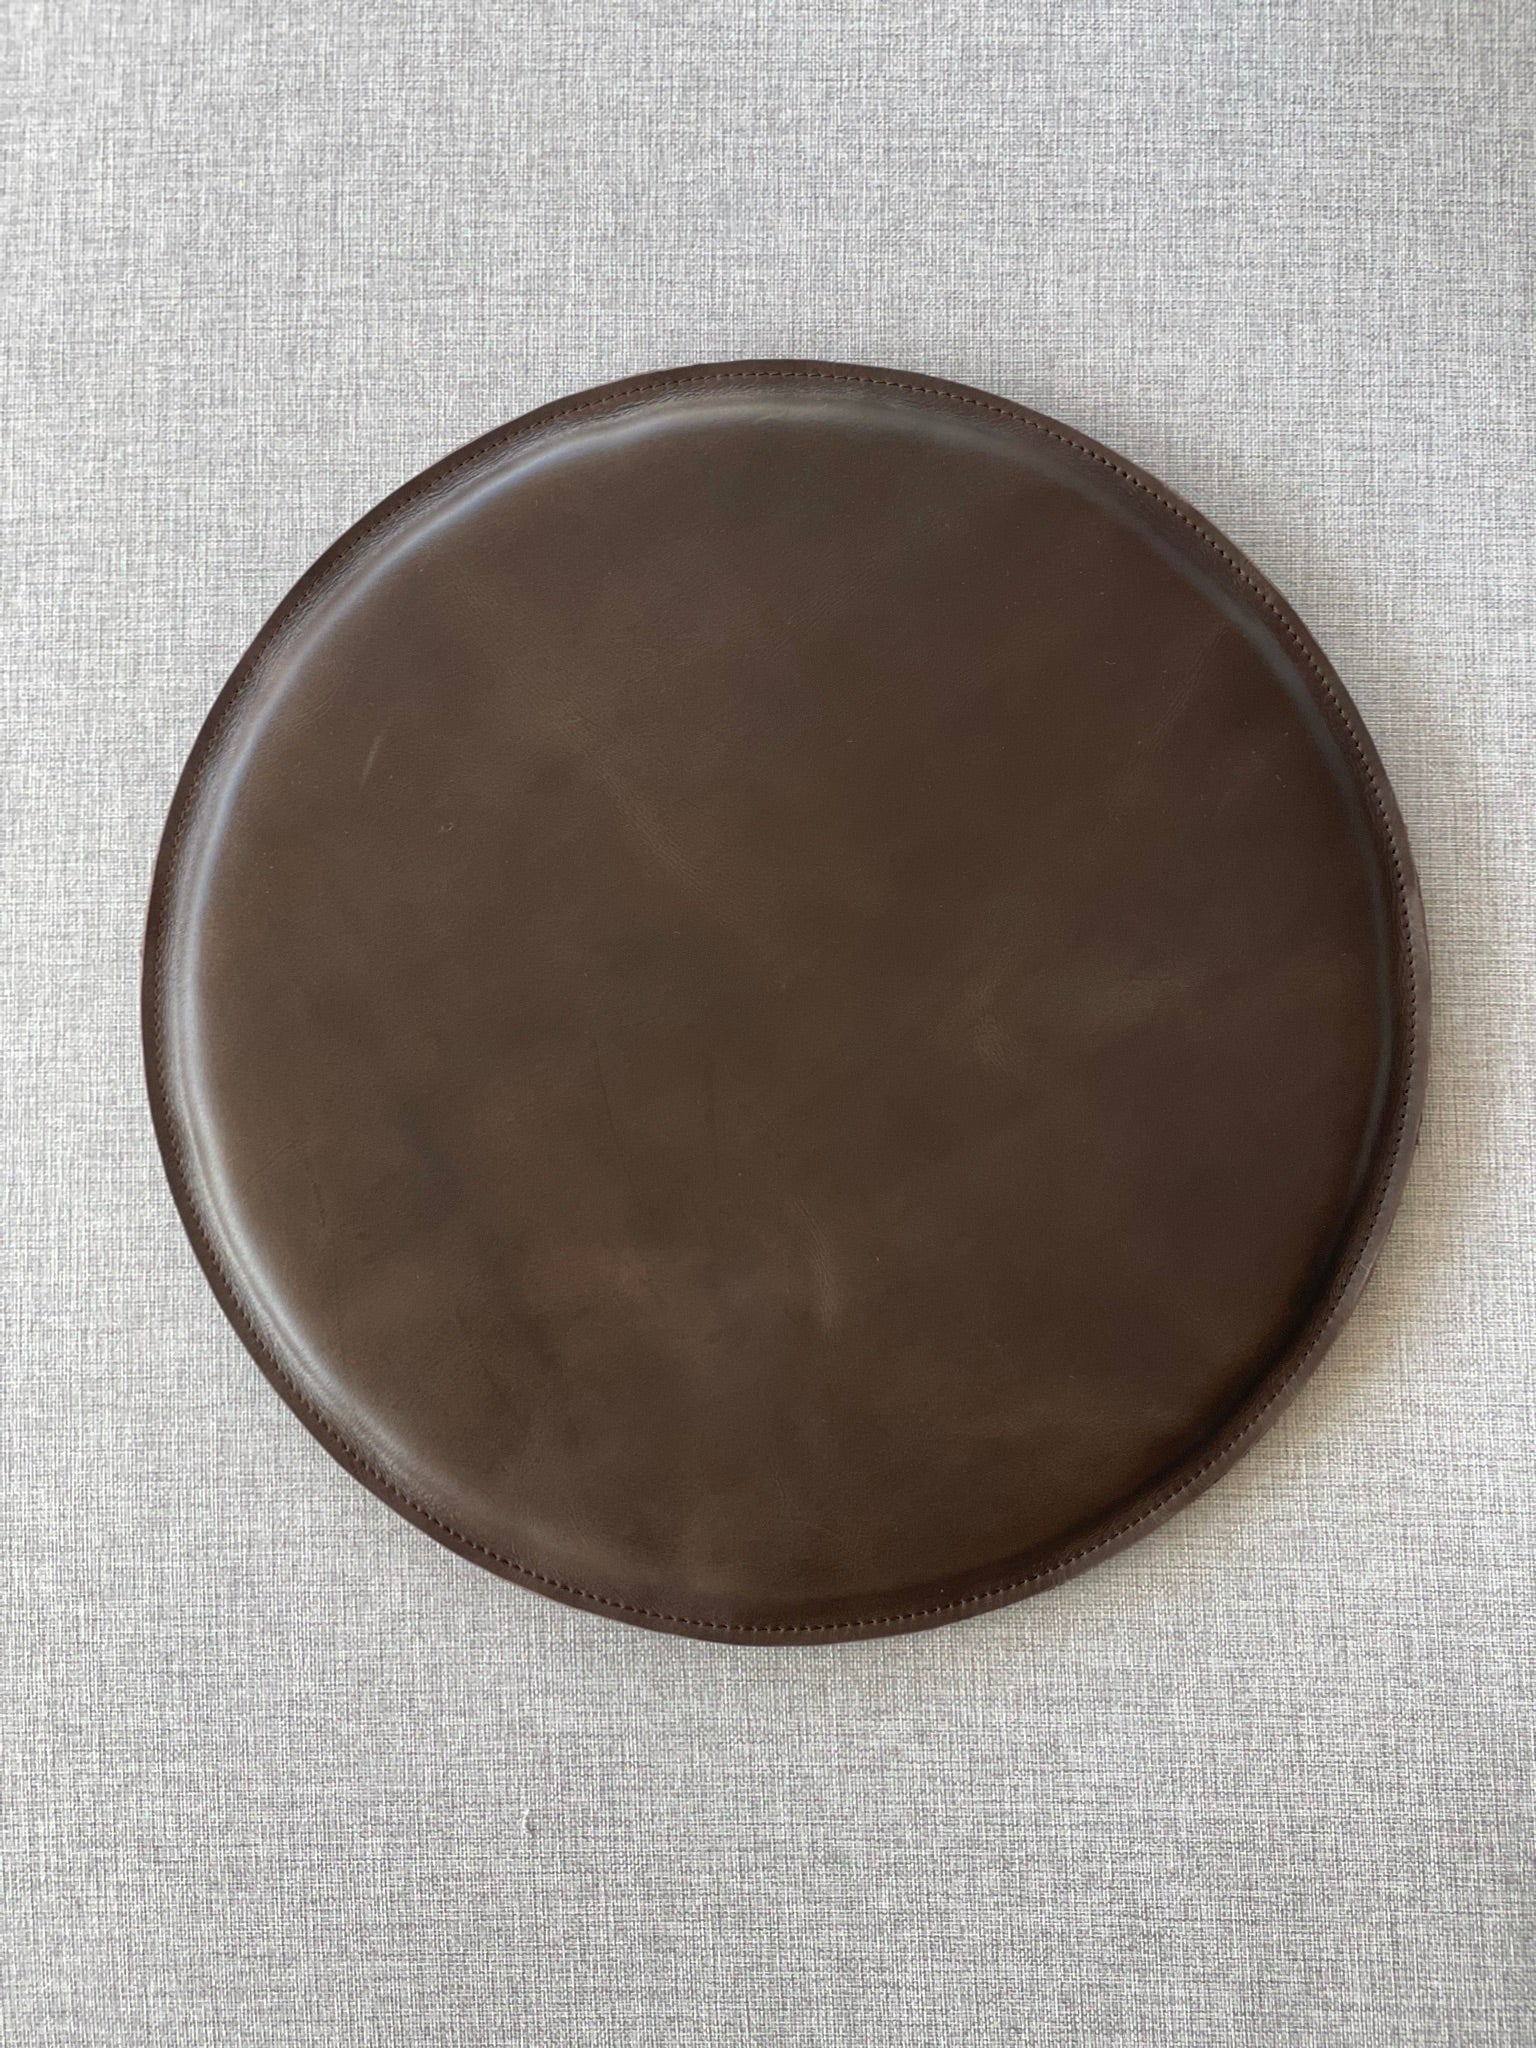 Cover. Leather Round Cushion Brown by Modoun Home Decor